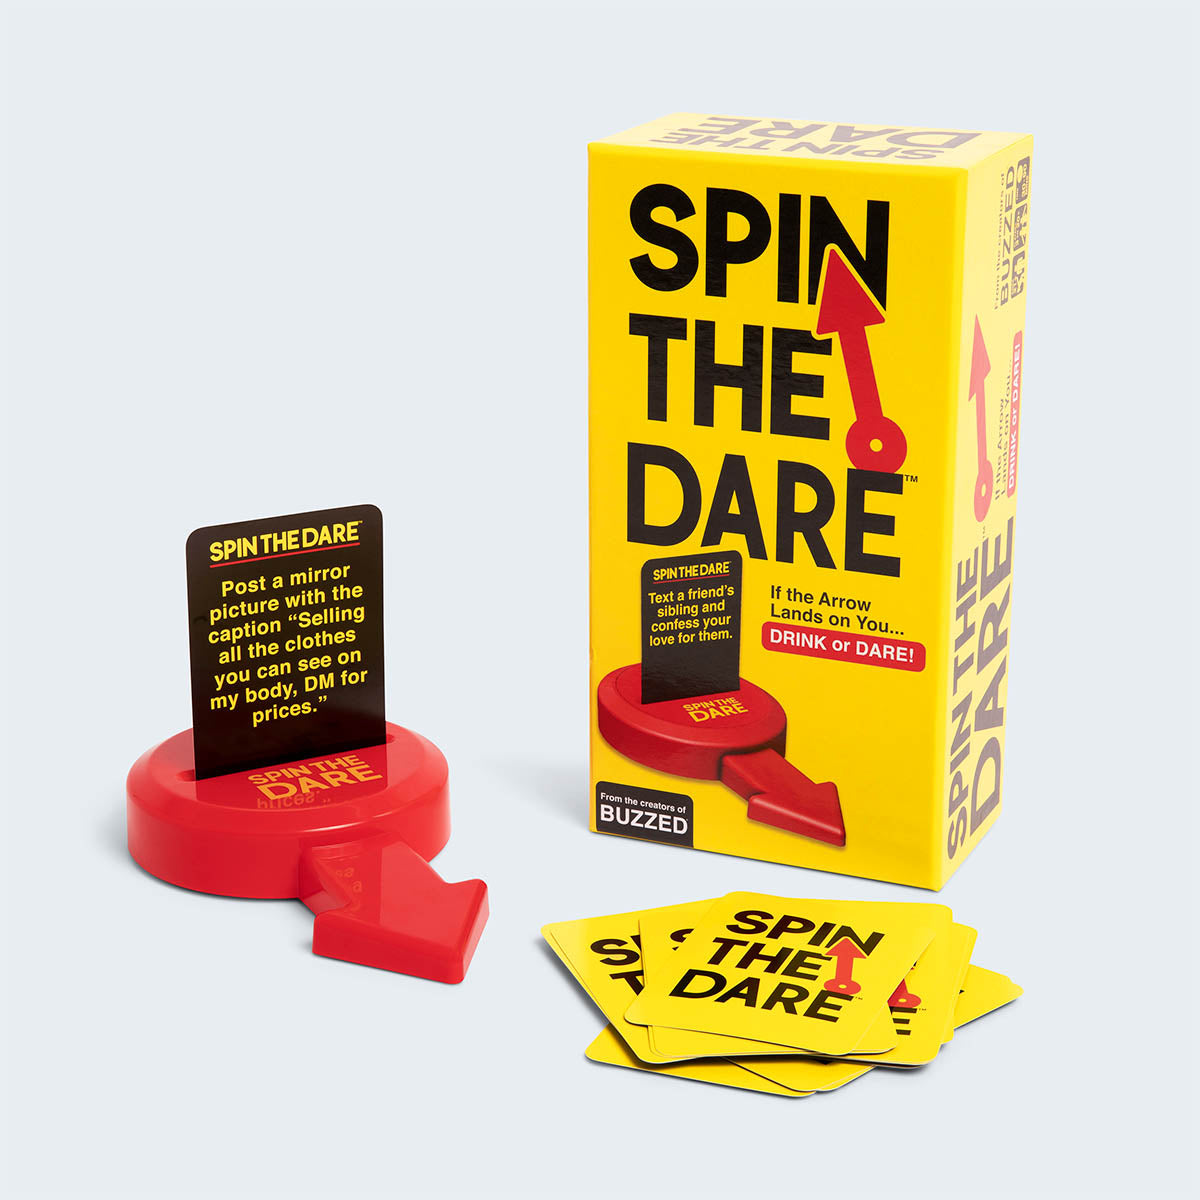 spin-the-dare-game-box-and-game-play-04-what-do-you-meme-by-relatable